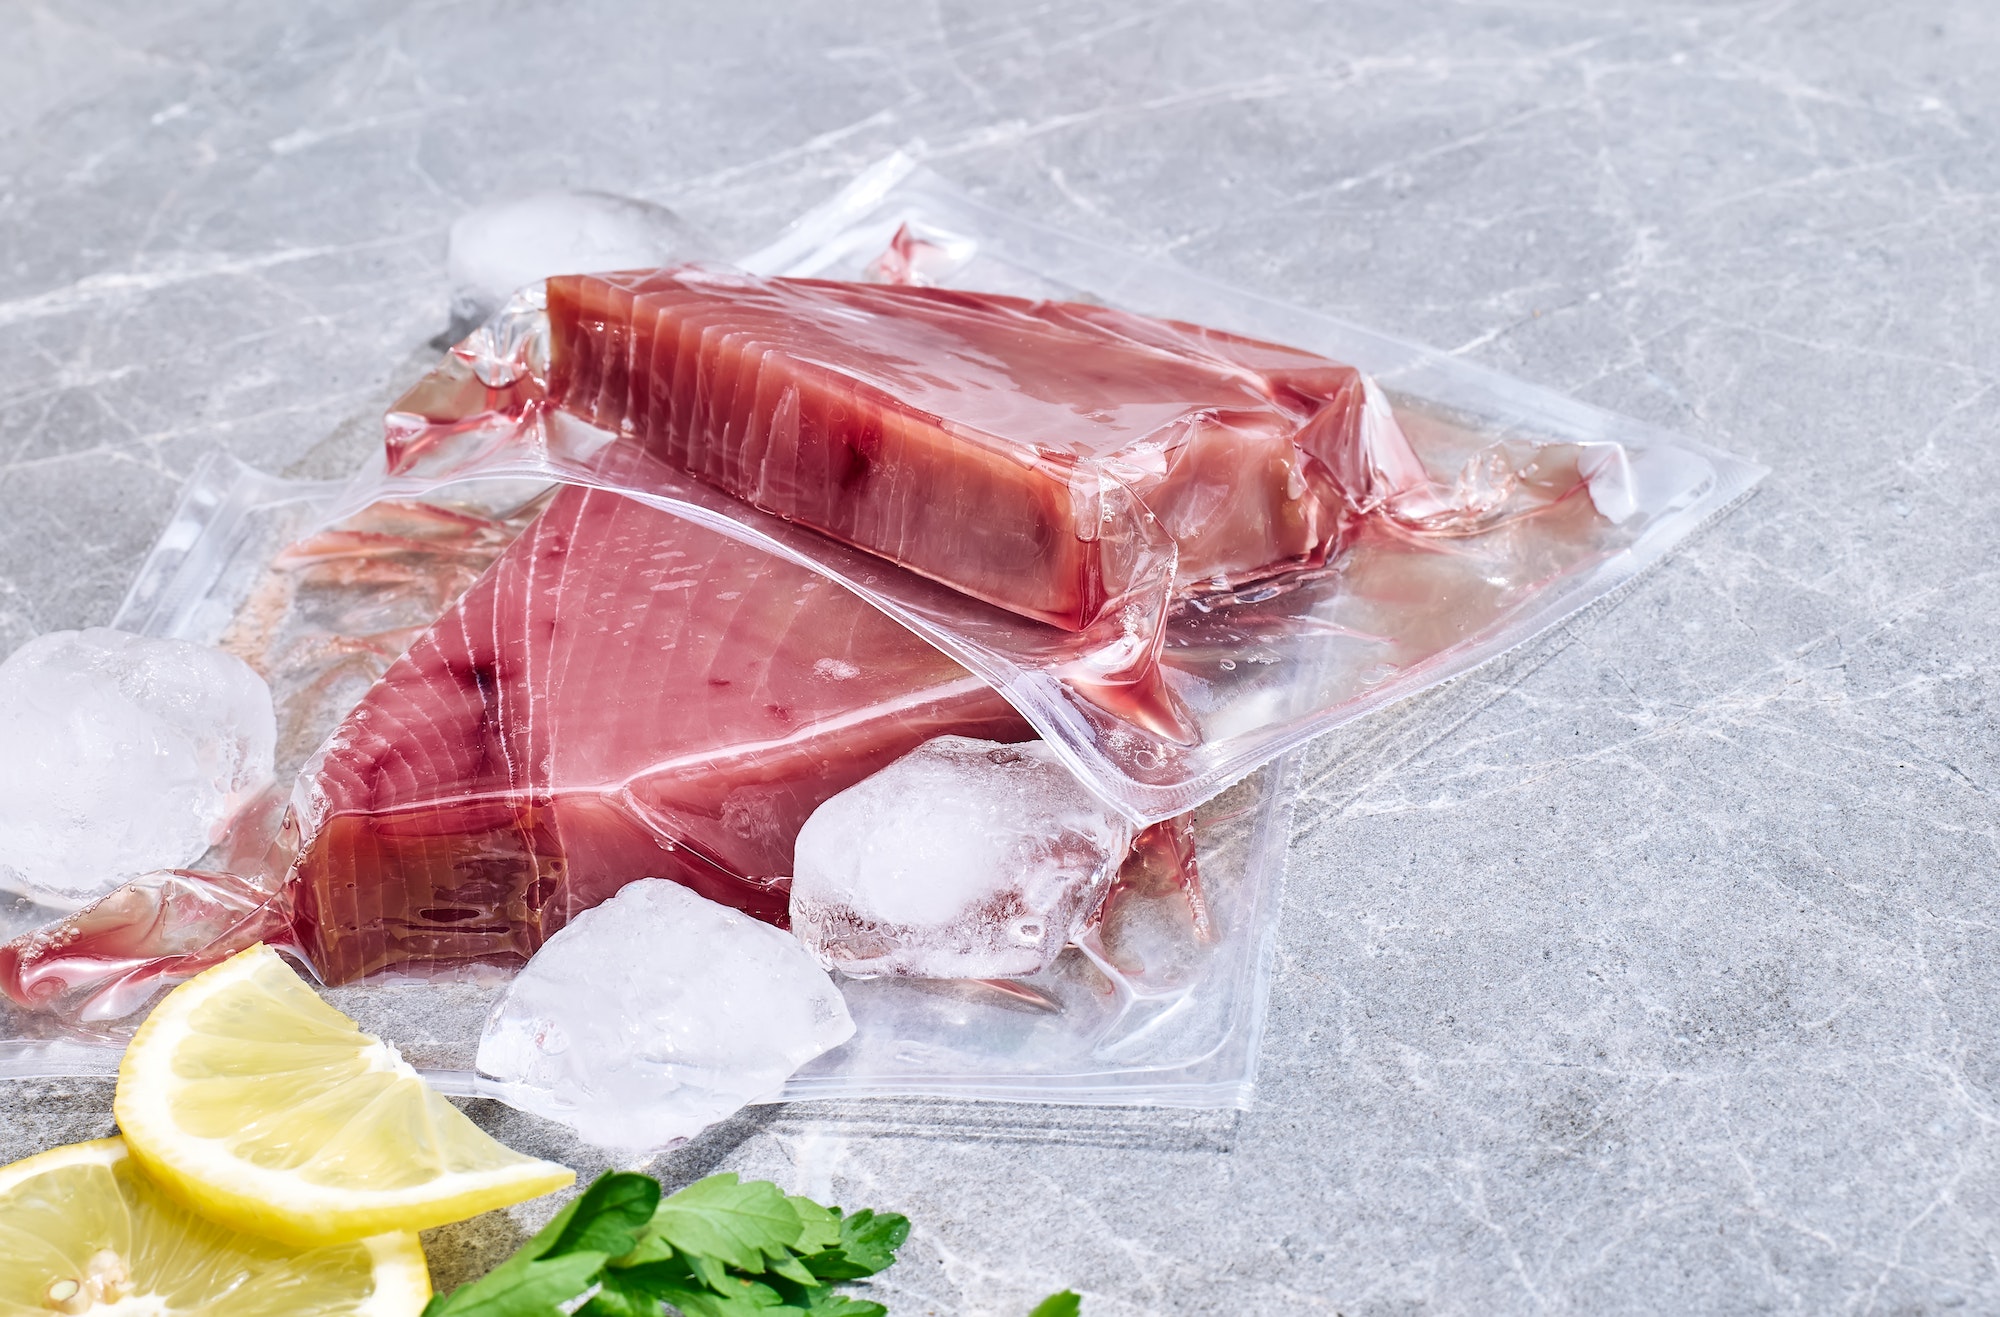 Red tuna fillets in vacuum package on gray marble background.